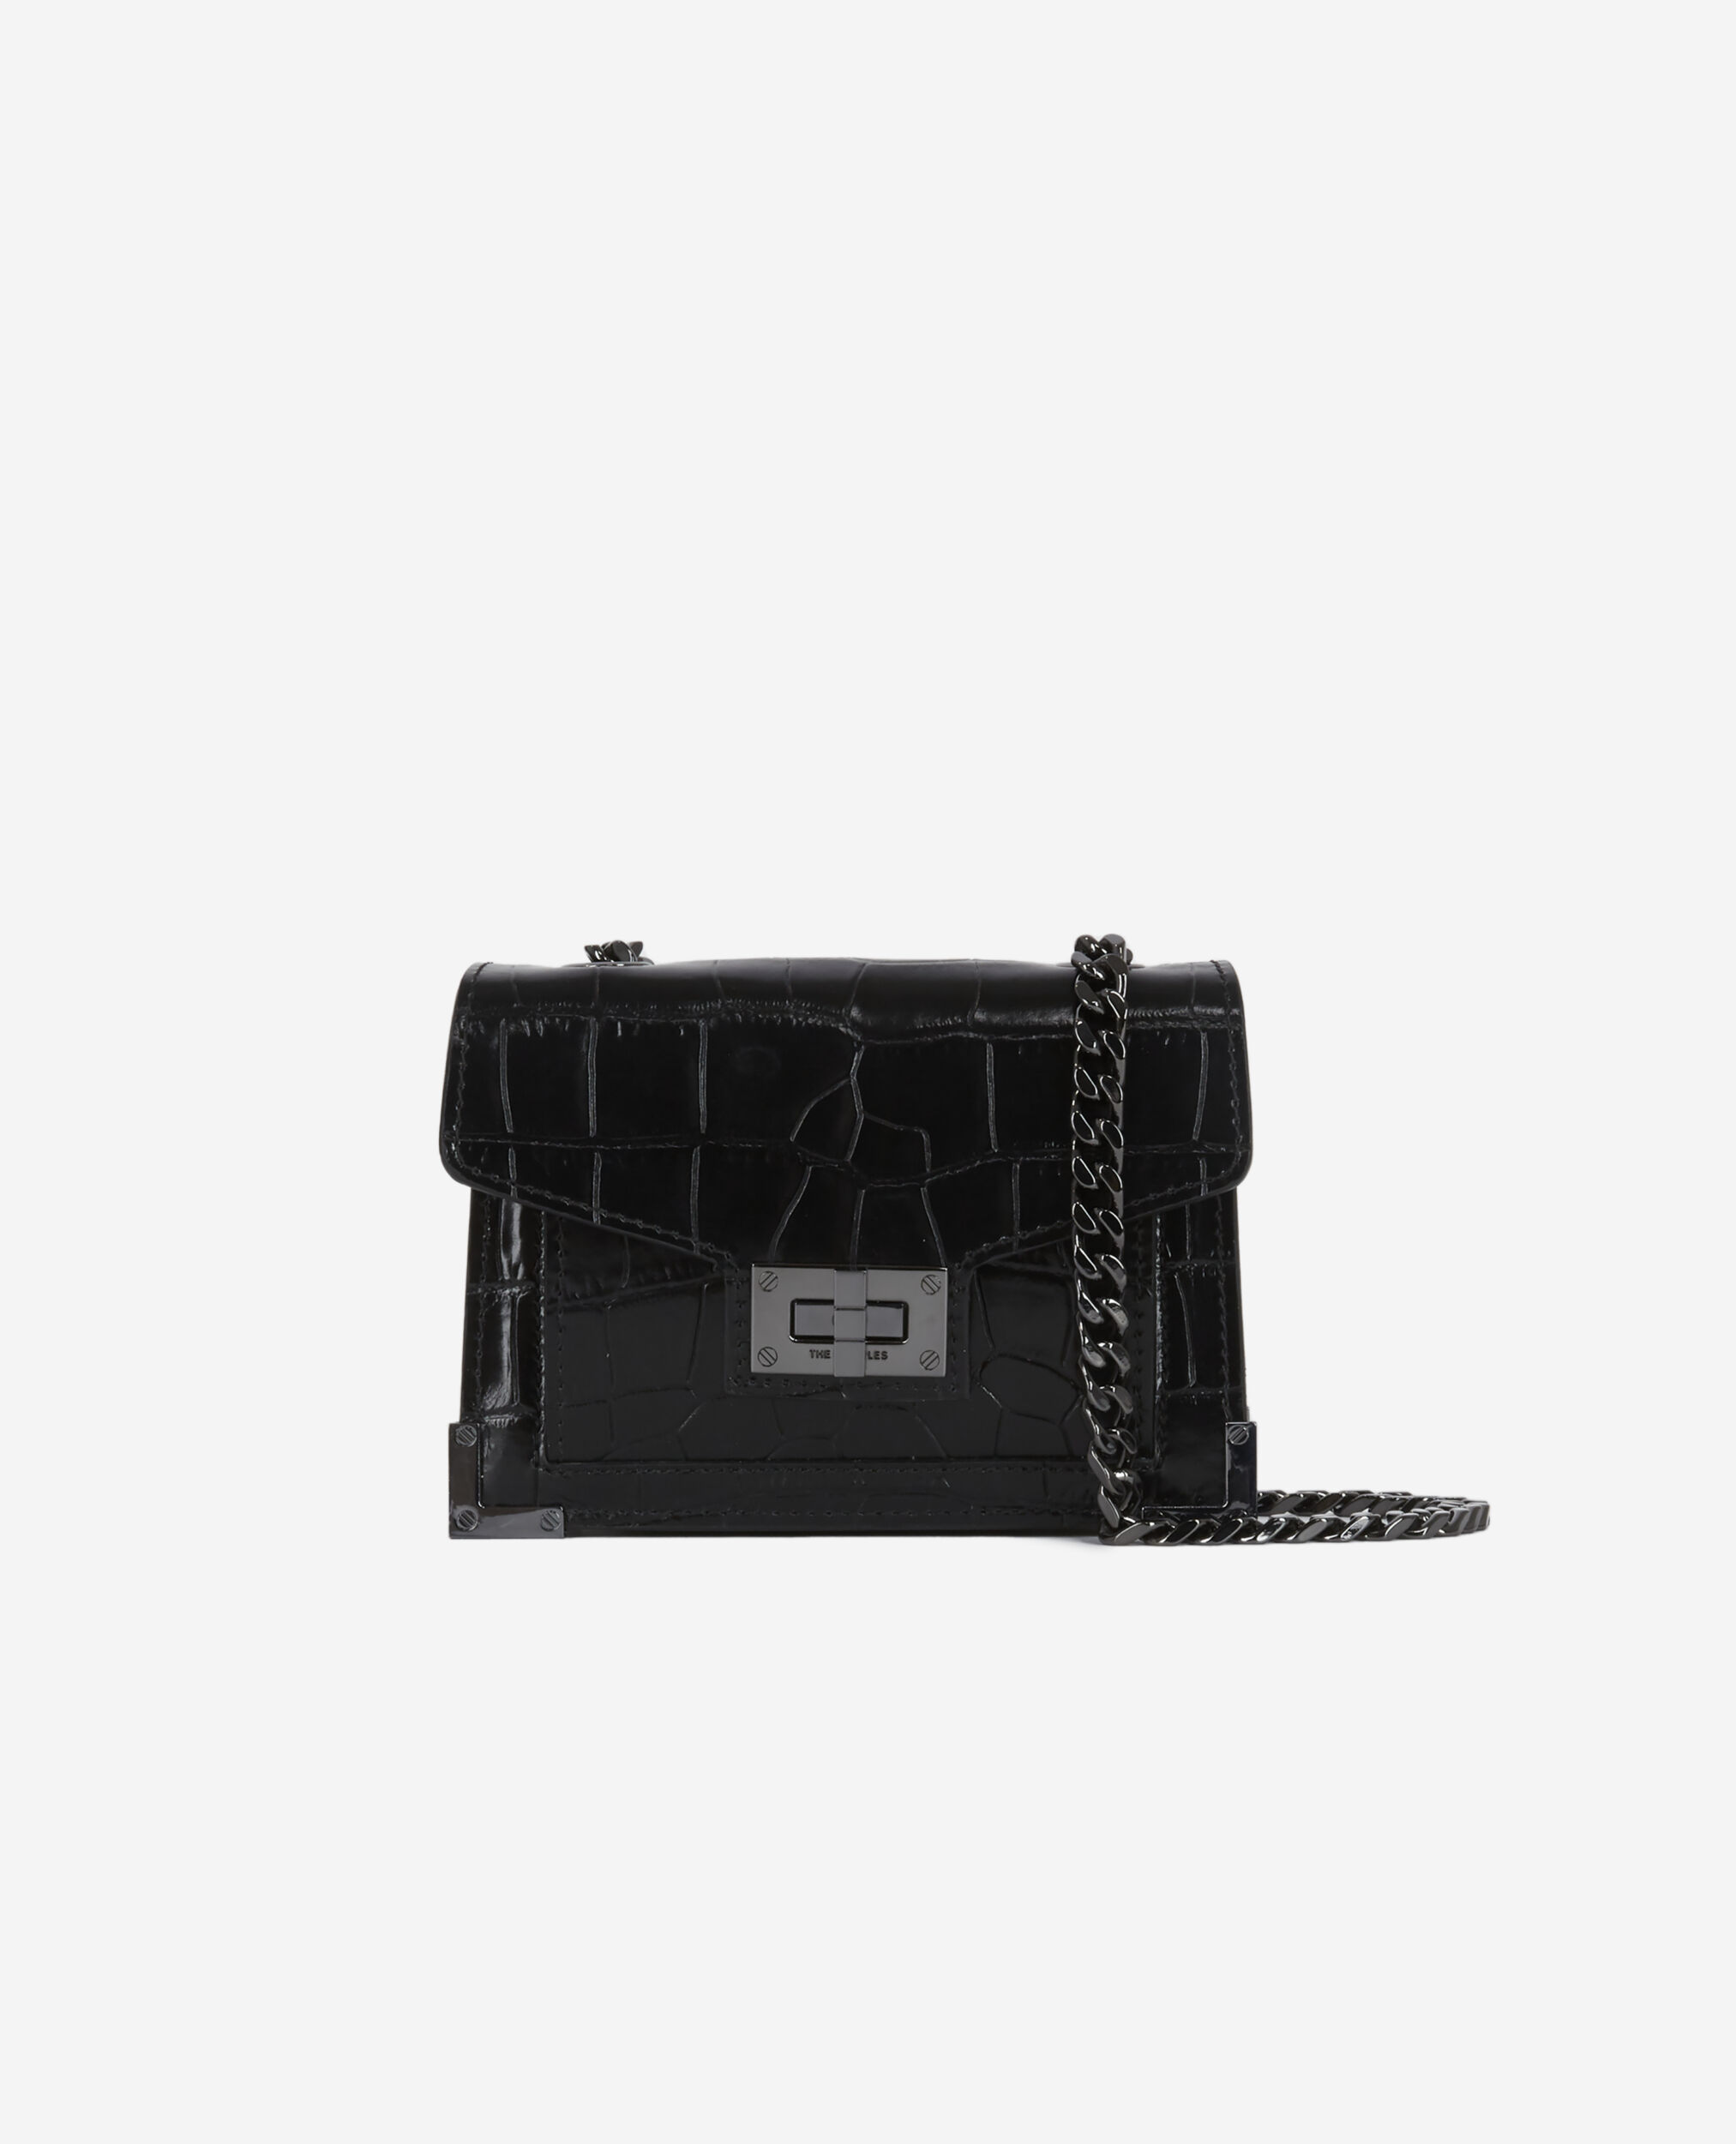 Small Emily bag in black leather with studs and eyelets | The Kooples